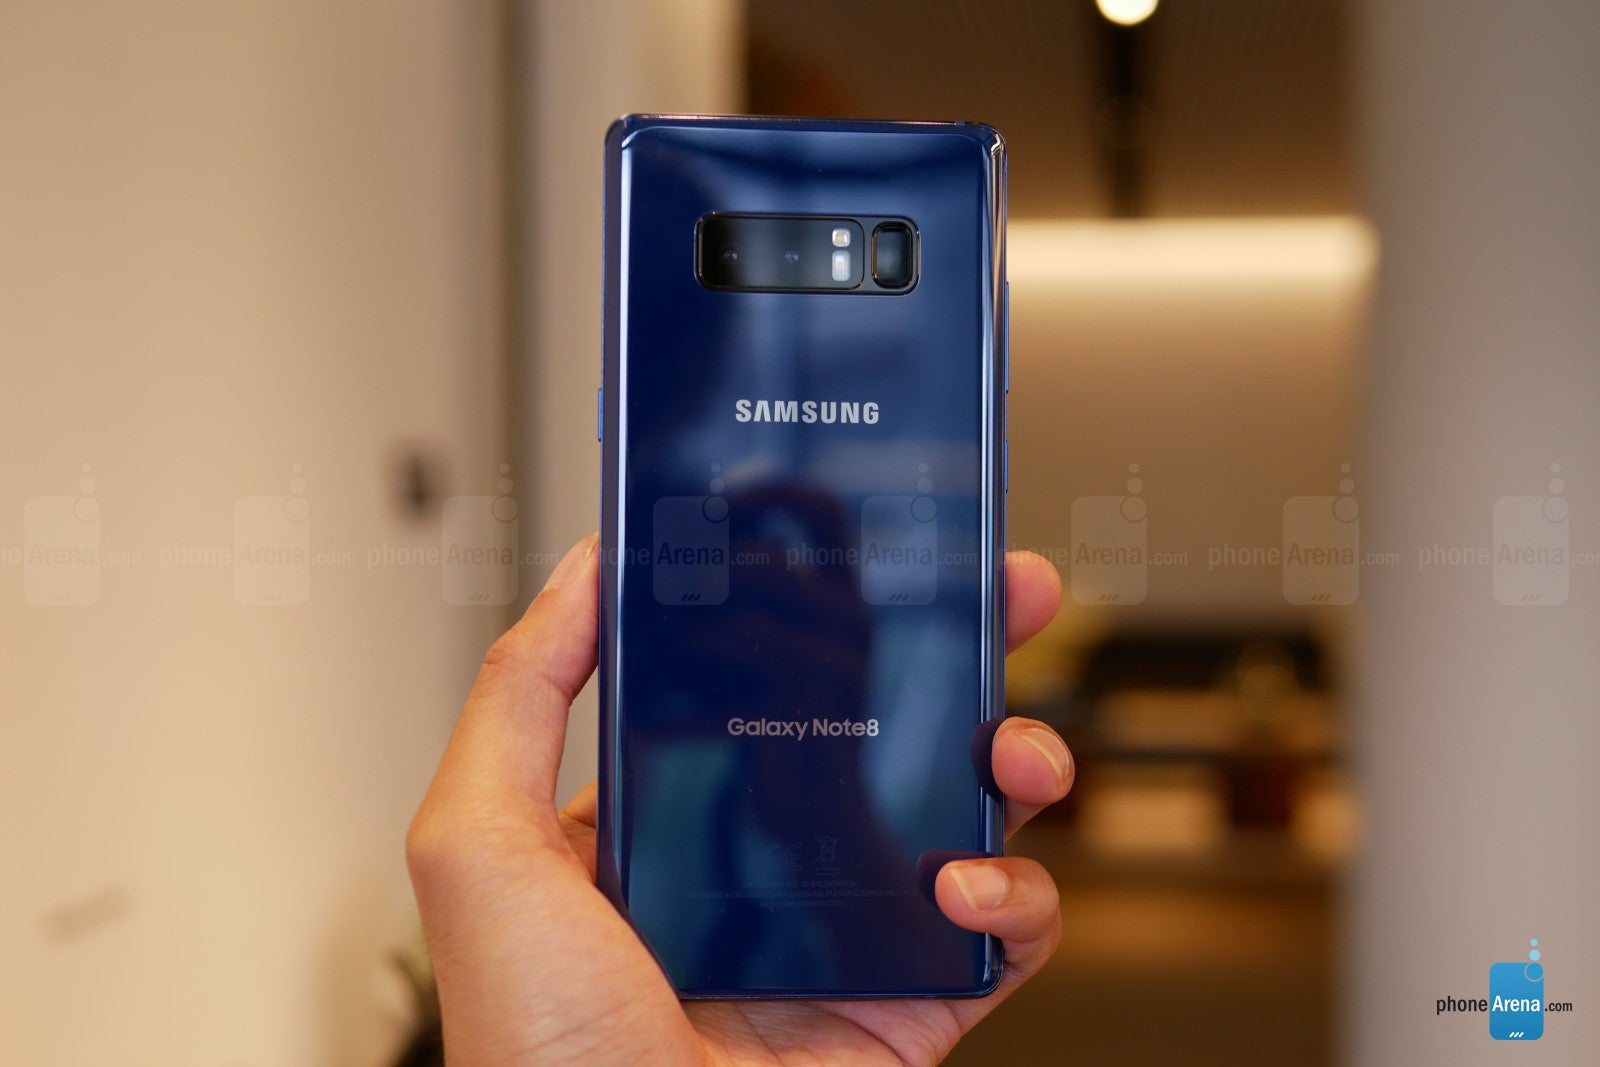 Results: do you like the Galaxy Note 8?